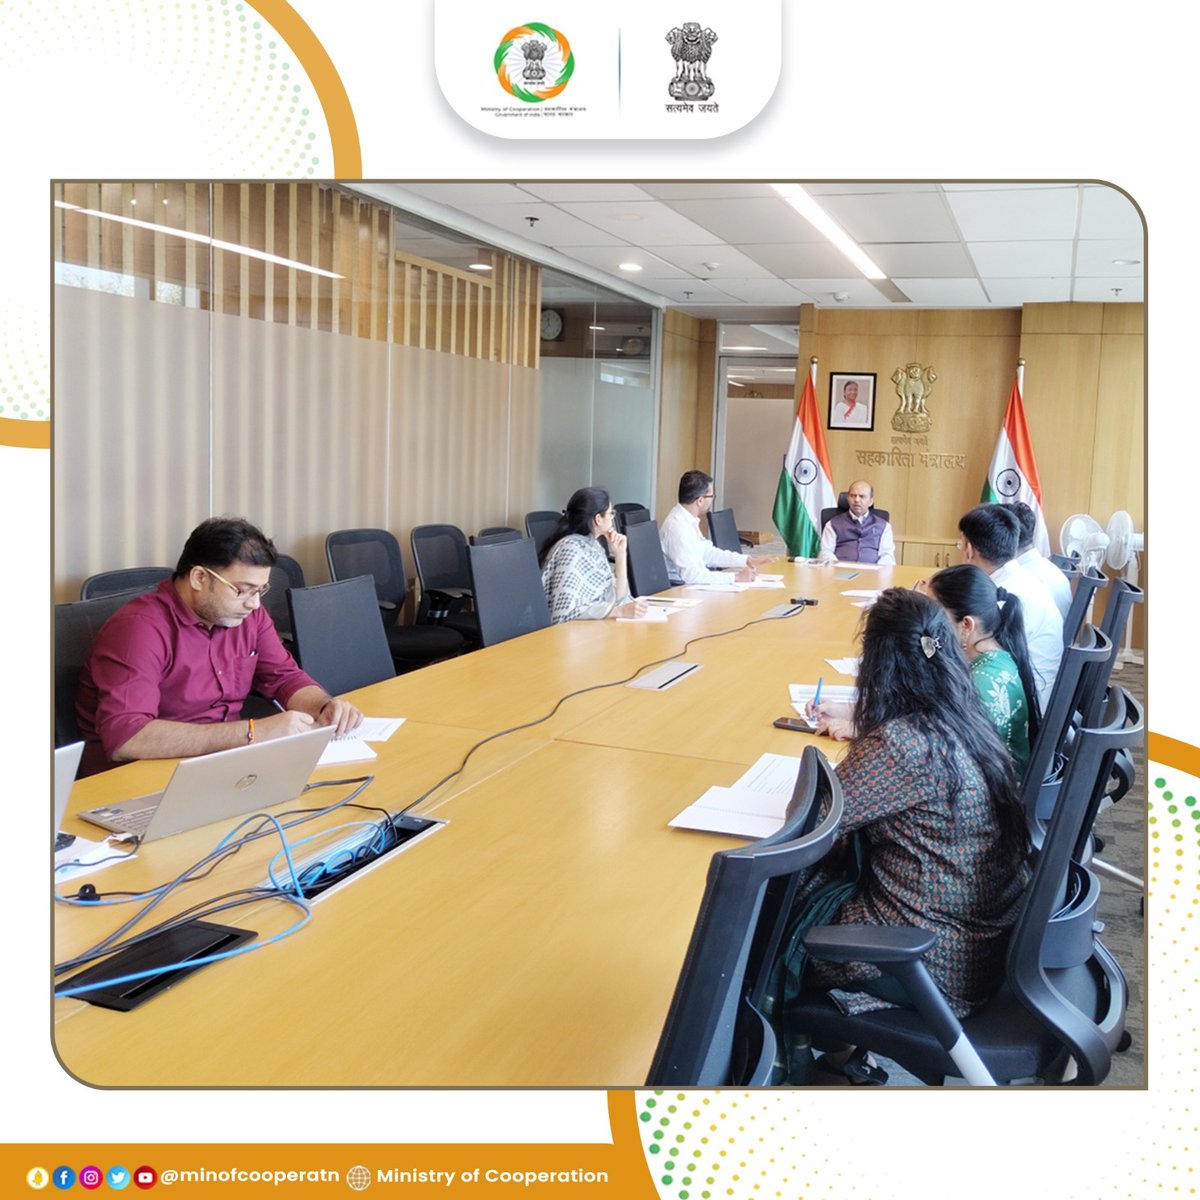 Today, Dr. Ashish Kumar Bhutani, Secretary, MoC, convened a meeting with the Project Management Unit (PMU) to review the progress of the implementation of world's largest grain storage plan in the cooperative sector.

#EmpoweringCooperatives #SahakarSeSamriddhi #Farmers #grain